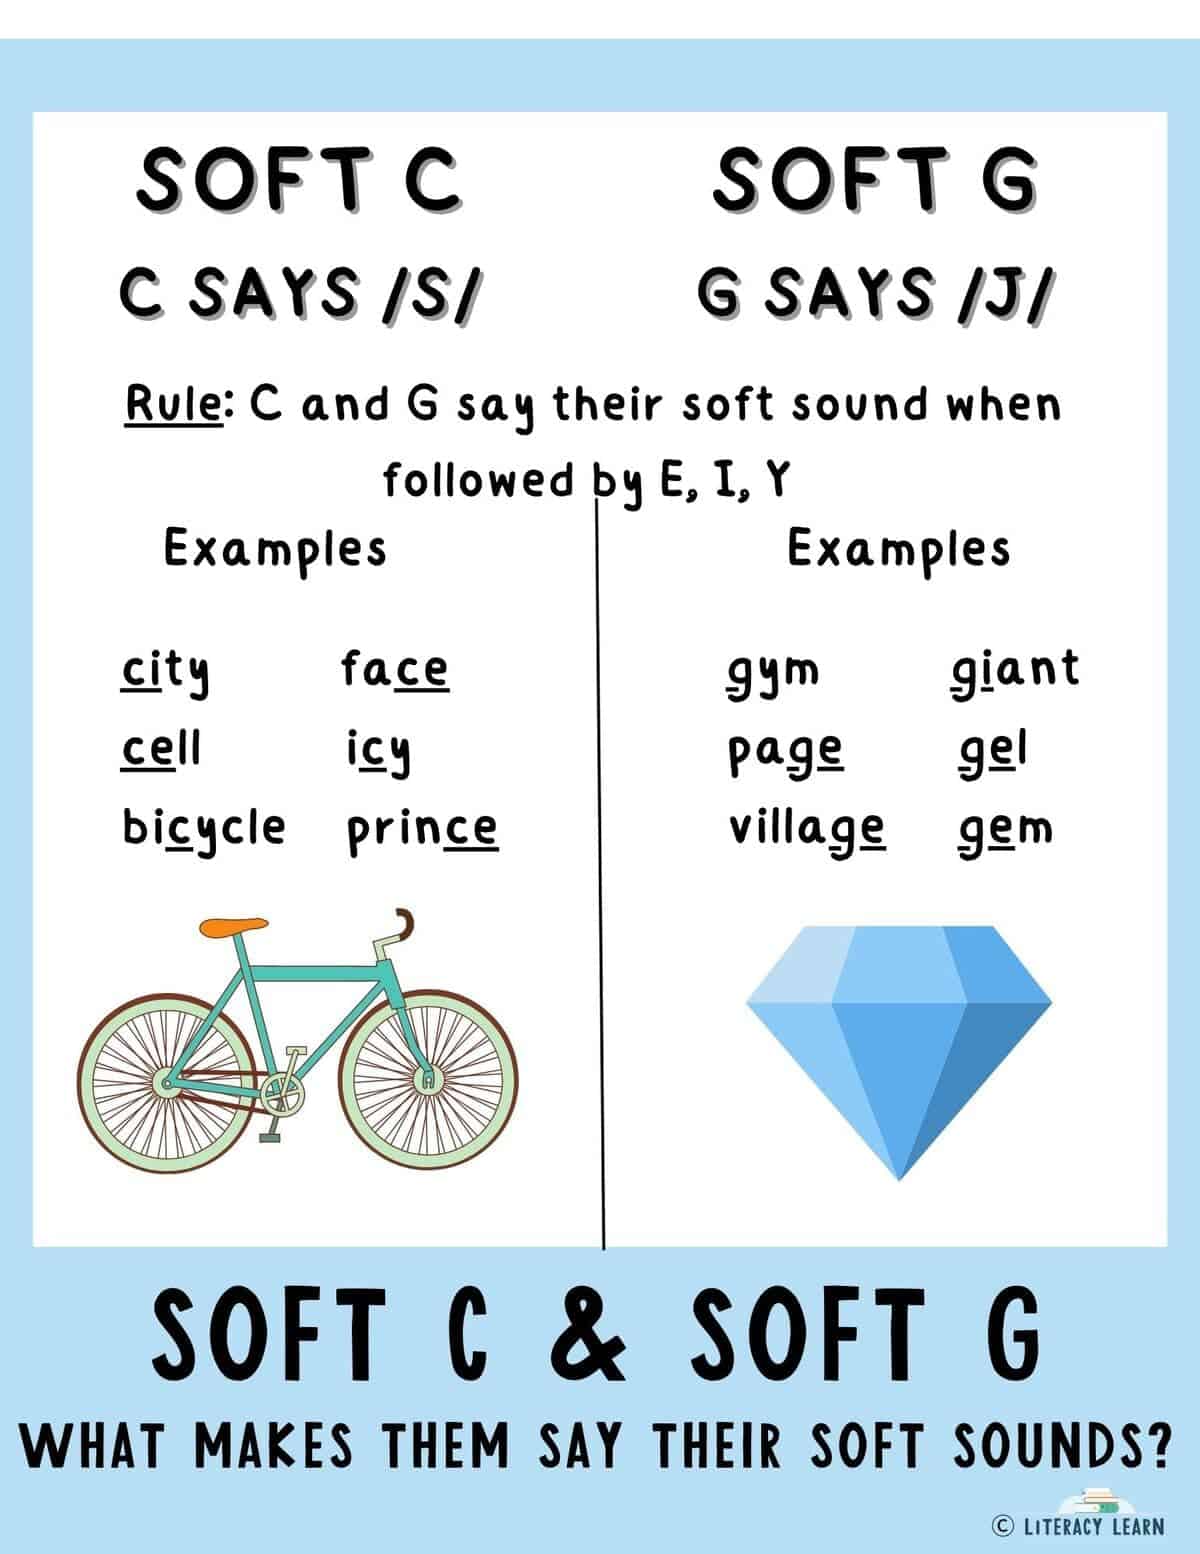 Blue image with soft C and soft G rules, examples, and pictures.